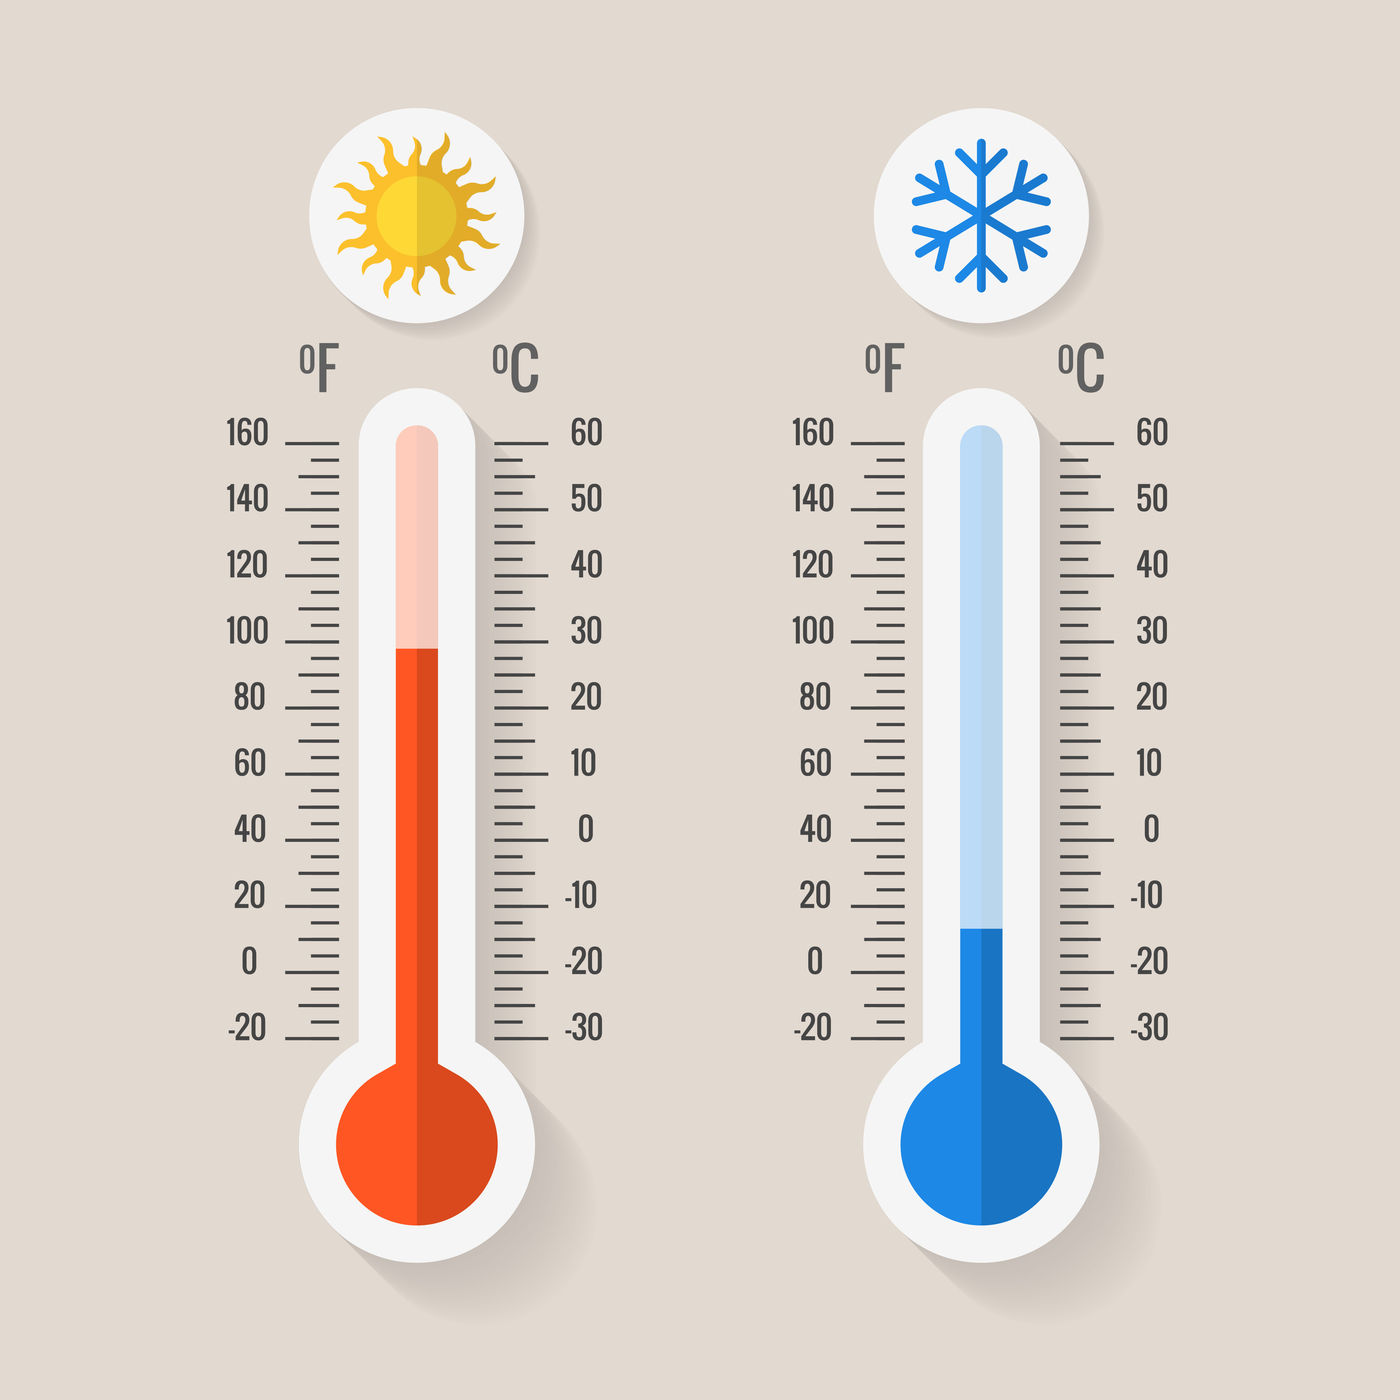 Celsius meteorology thermometers measuring heat and cold, vector